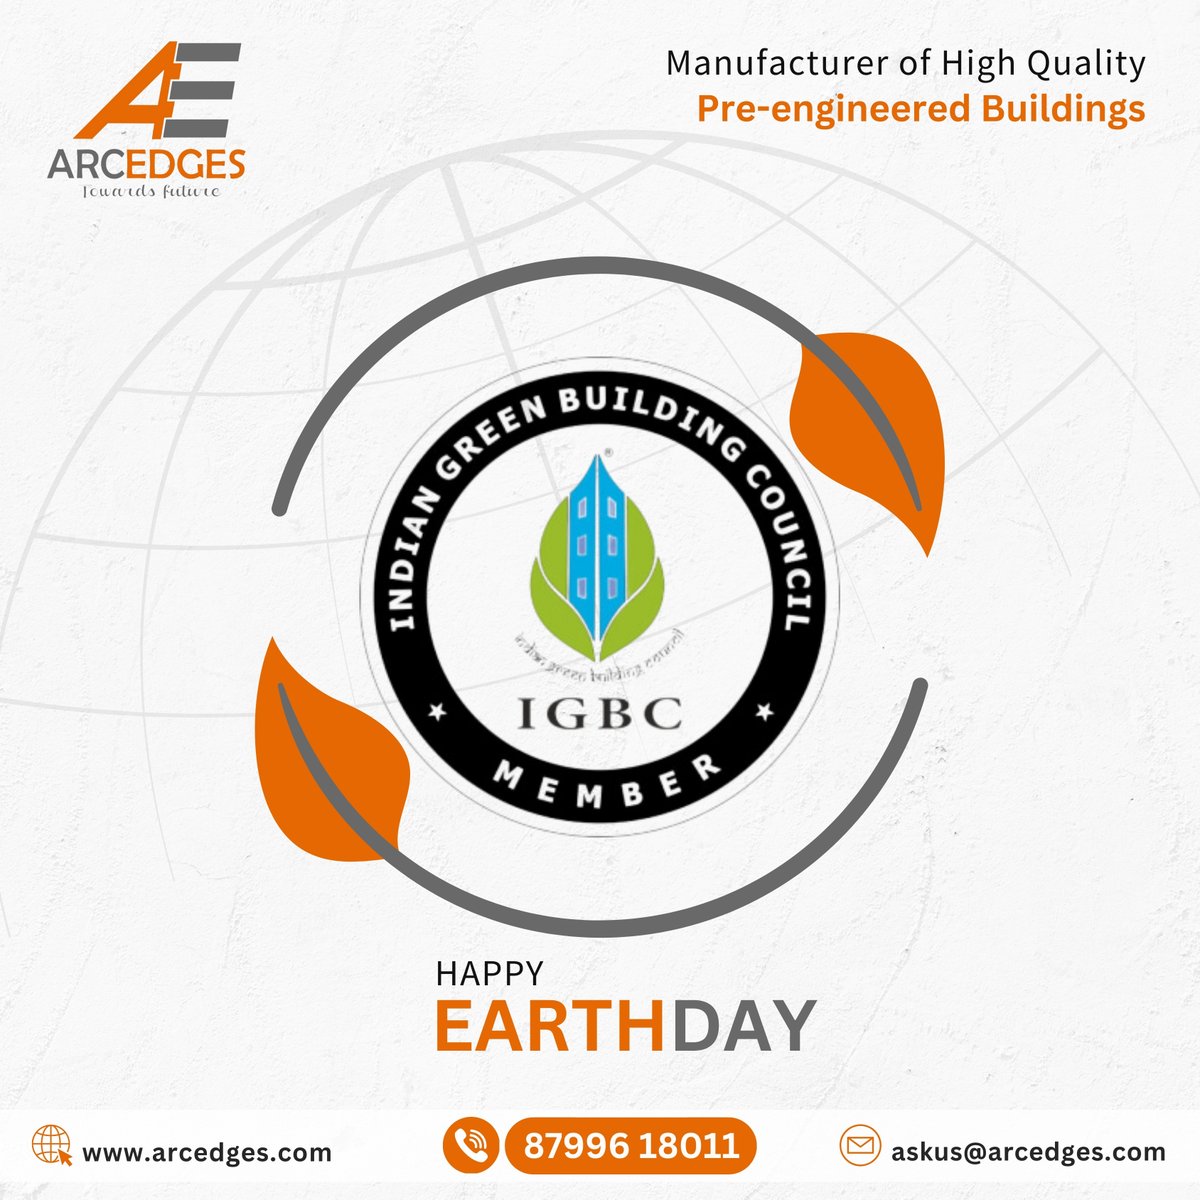 Happy Earth Day!  Let's celebrate the beauty of our planet and commit to protecting it for future generations. 
#EarthDay  #ProtectOurPlanet #GoGreen 
#arcedges #proudarcedgions #towardsfuture
#peb
#preengineeredbuildings
#steelbuildings
#prefabconstruction
#buildingsolutions